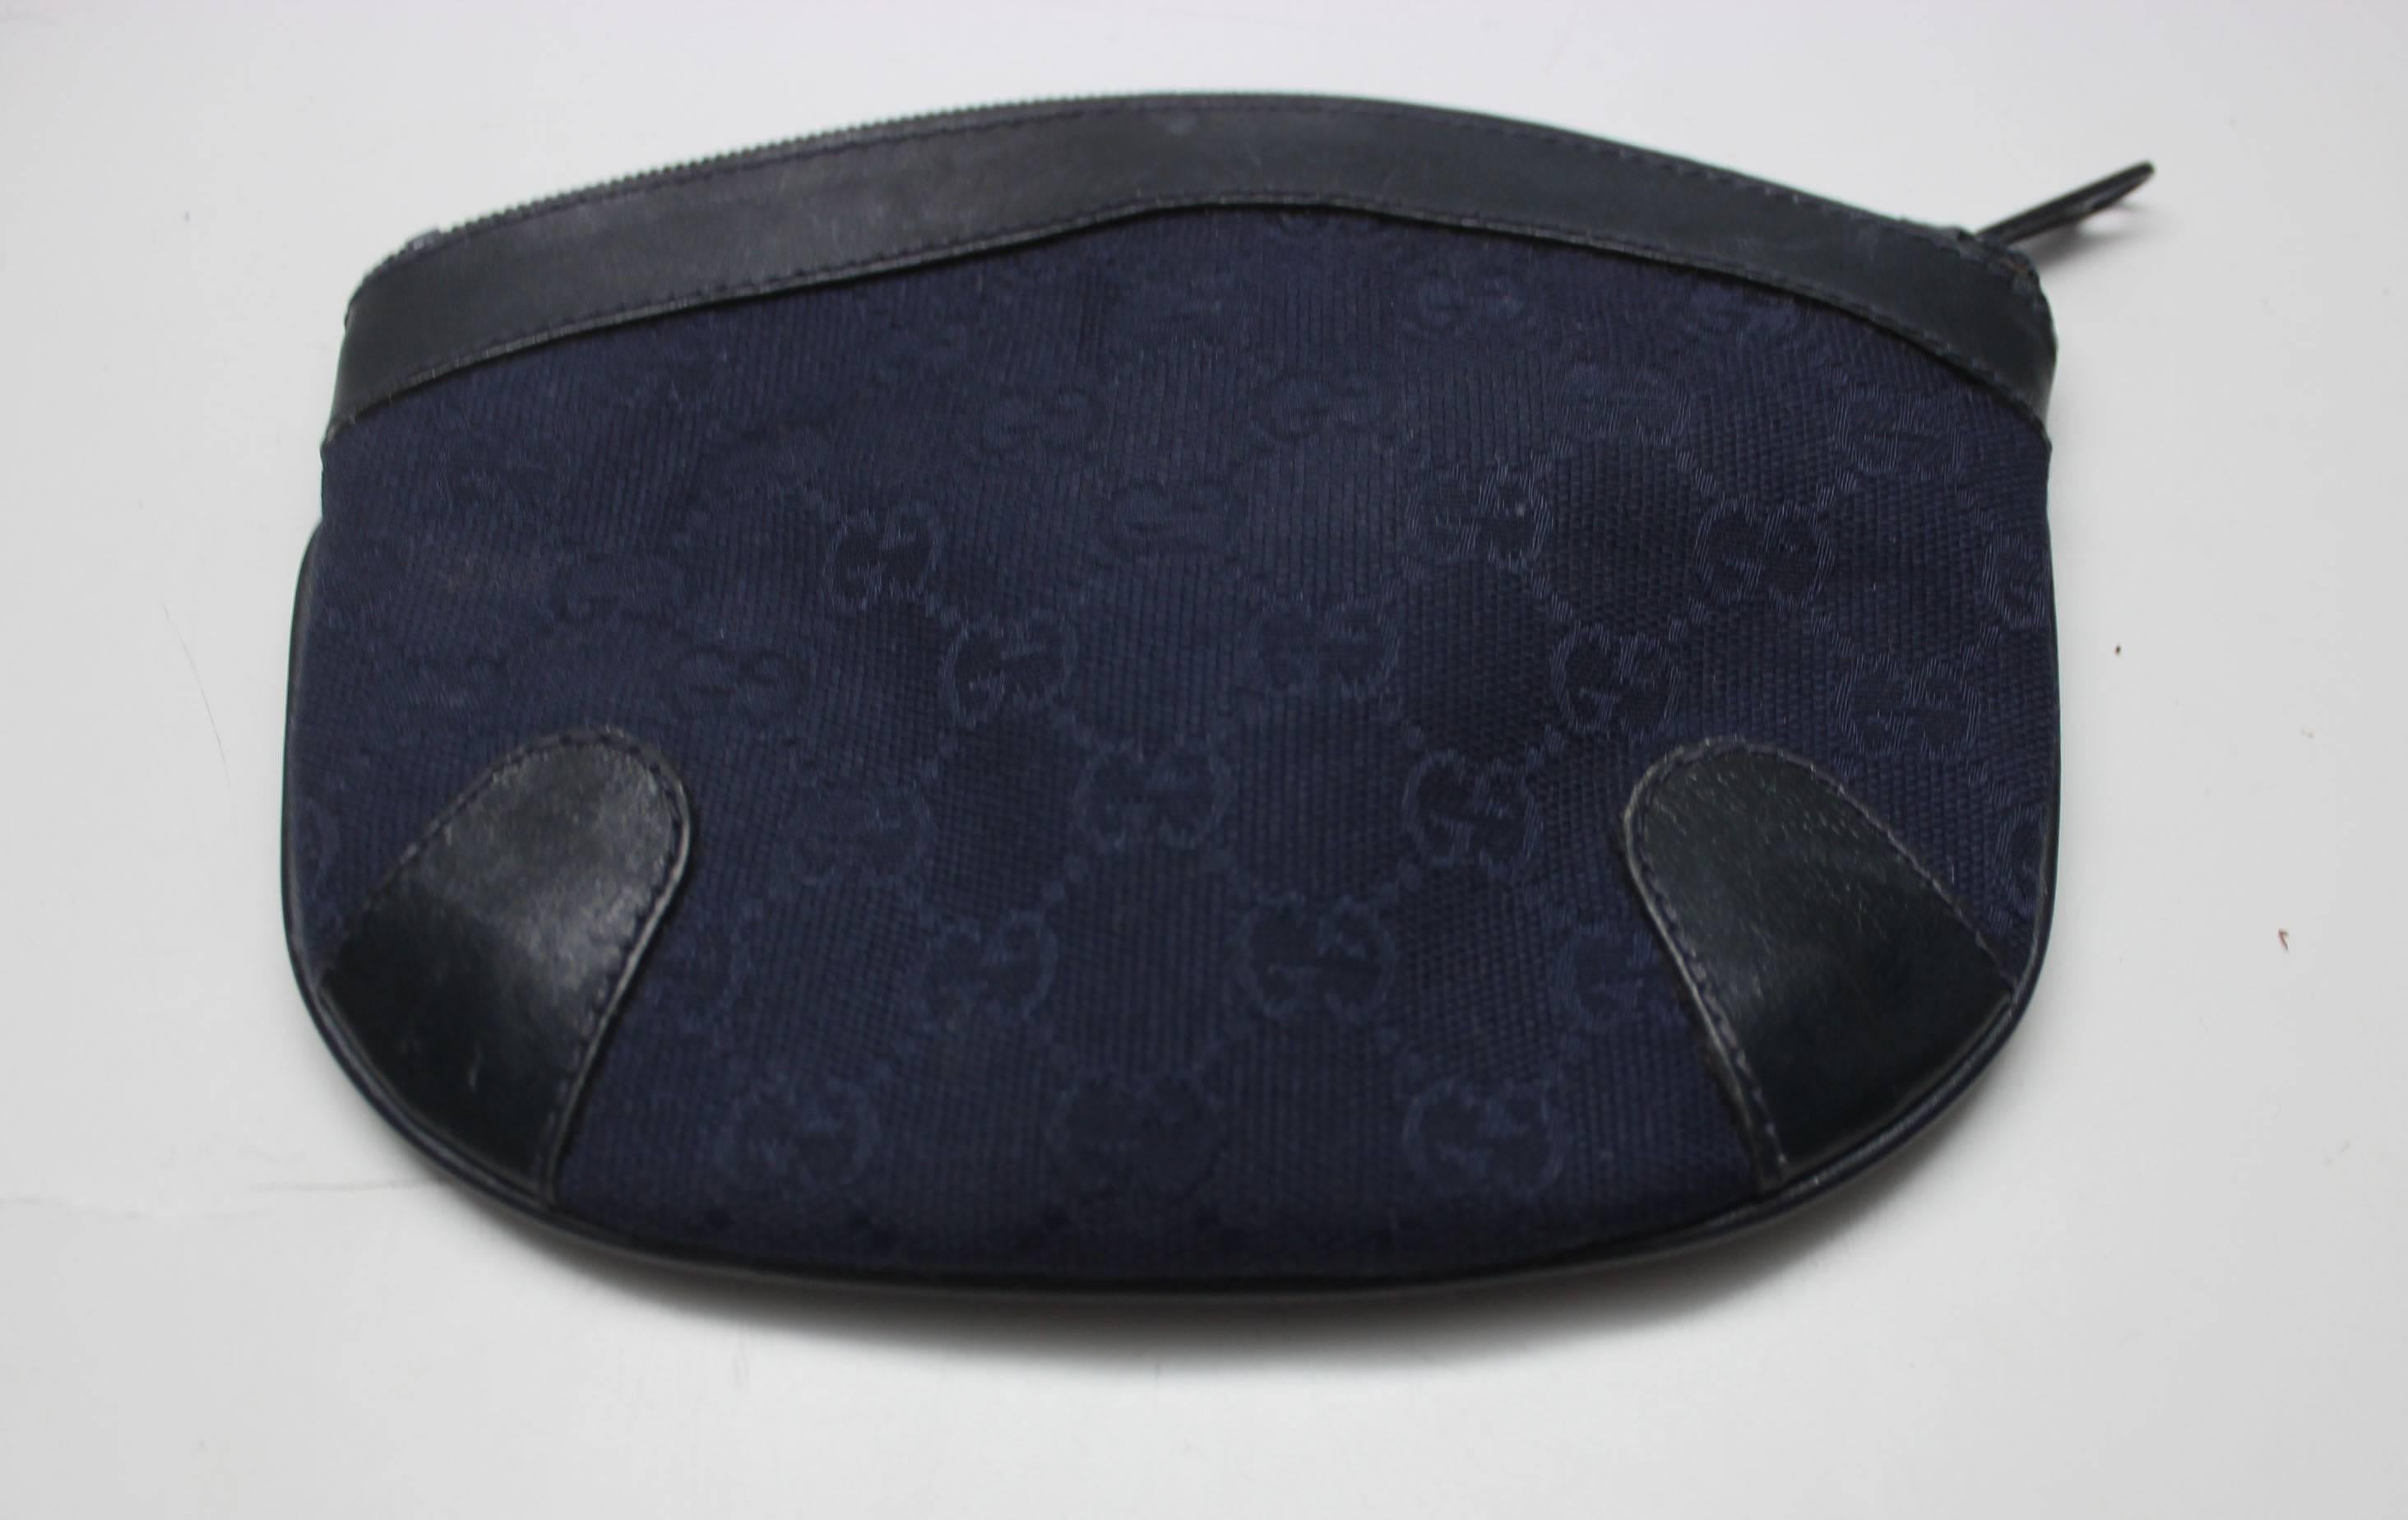 This vintage navy Gucci canvas cosmetic bag is super chic and versatile. The dark monogrammed canvas is durable, has reinforced corners, and a top zipper. The inside has the Gucci label and light blue plasic lining. 
This bag can be used for make